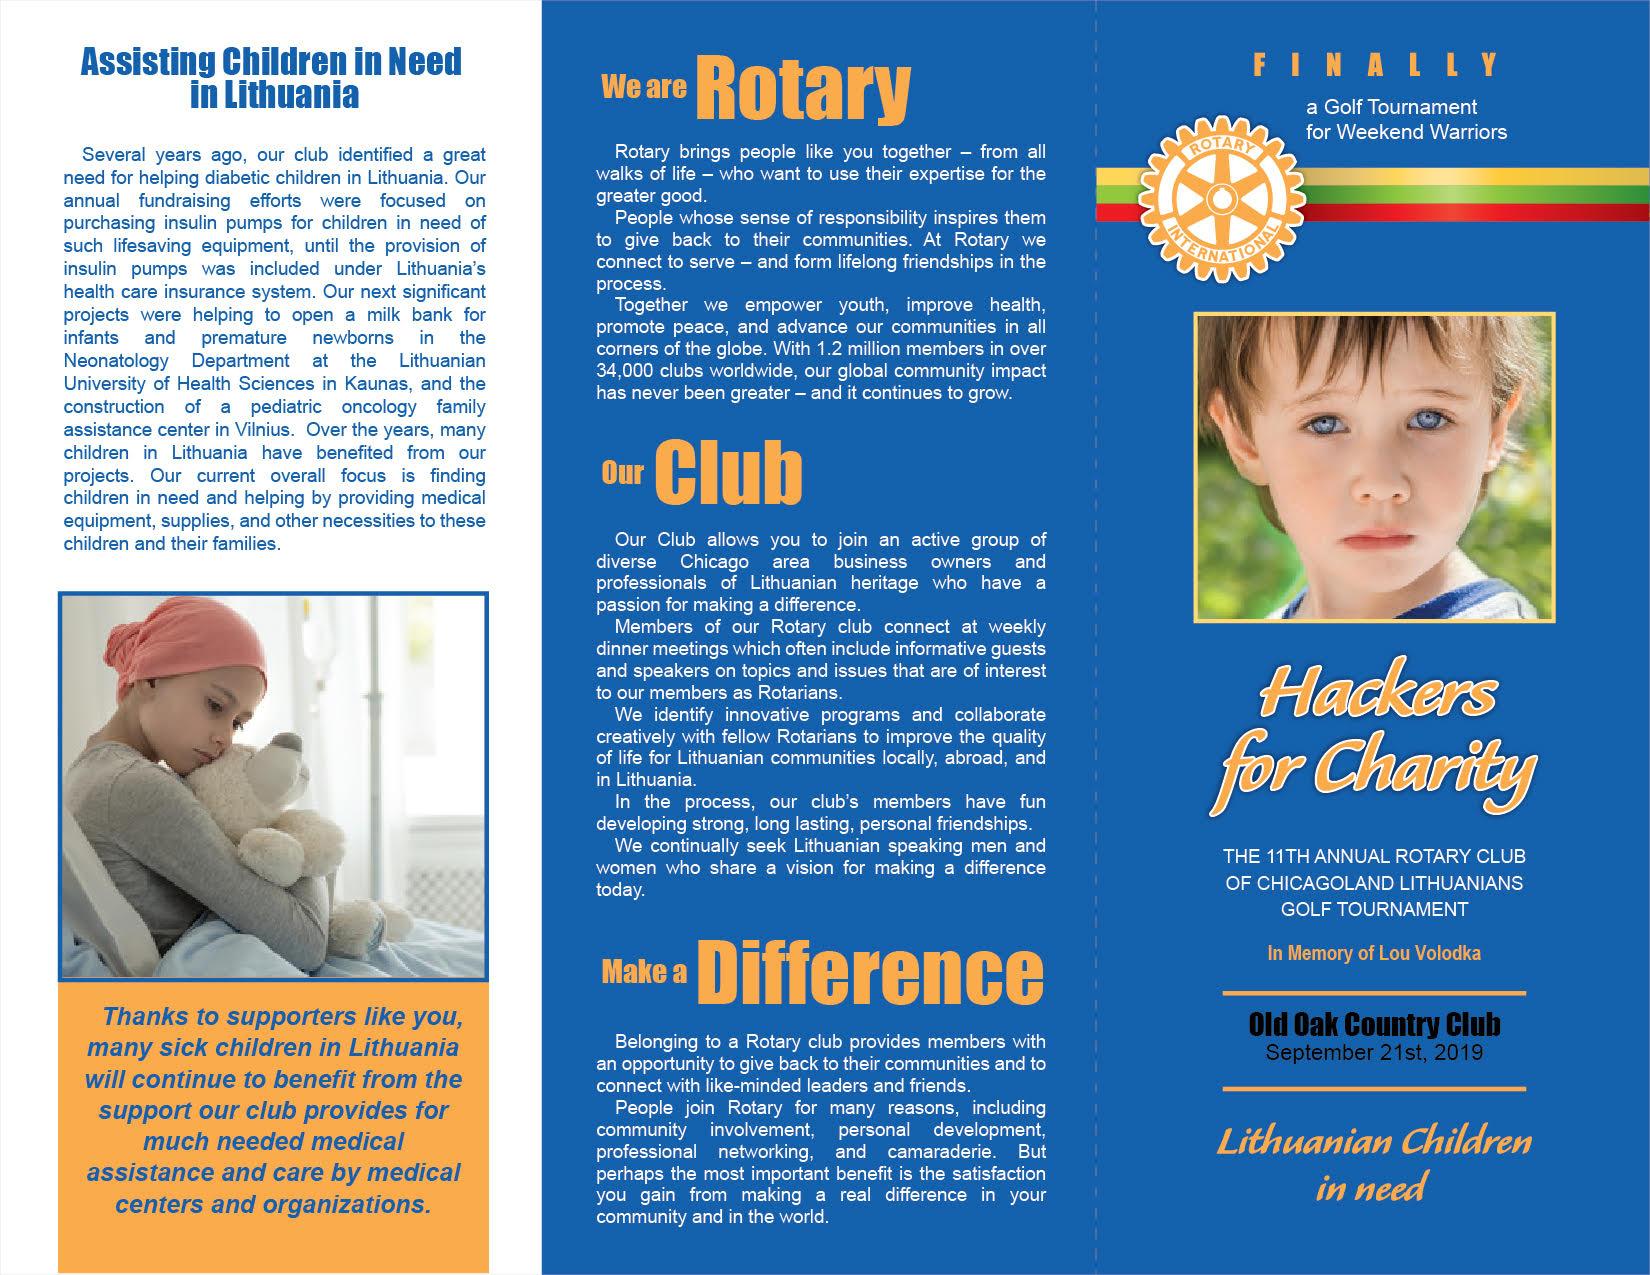 11th Annual Rotary Club of Chicagoland Lithuanians Charity Golf Tournament